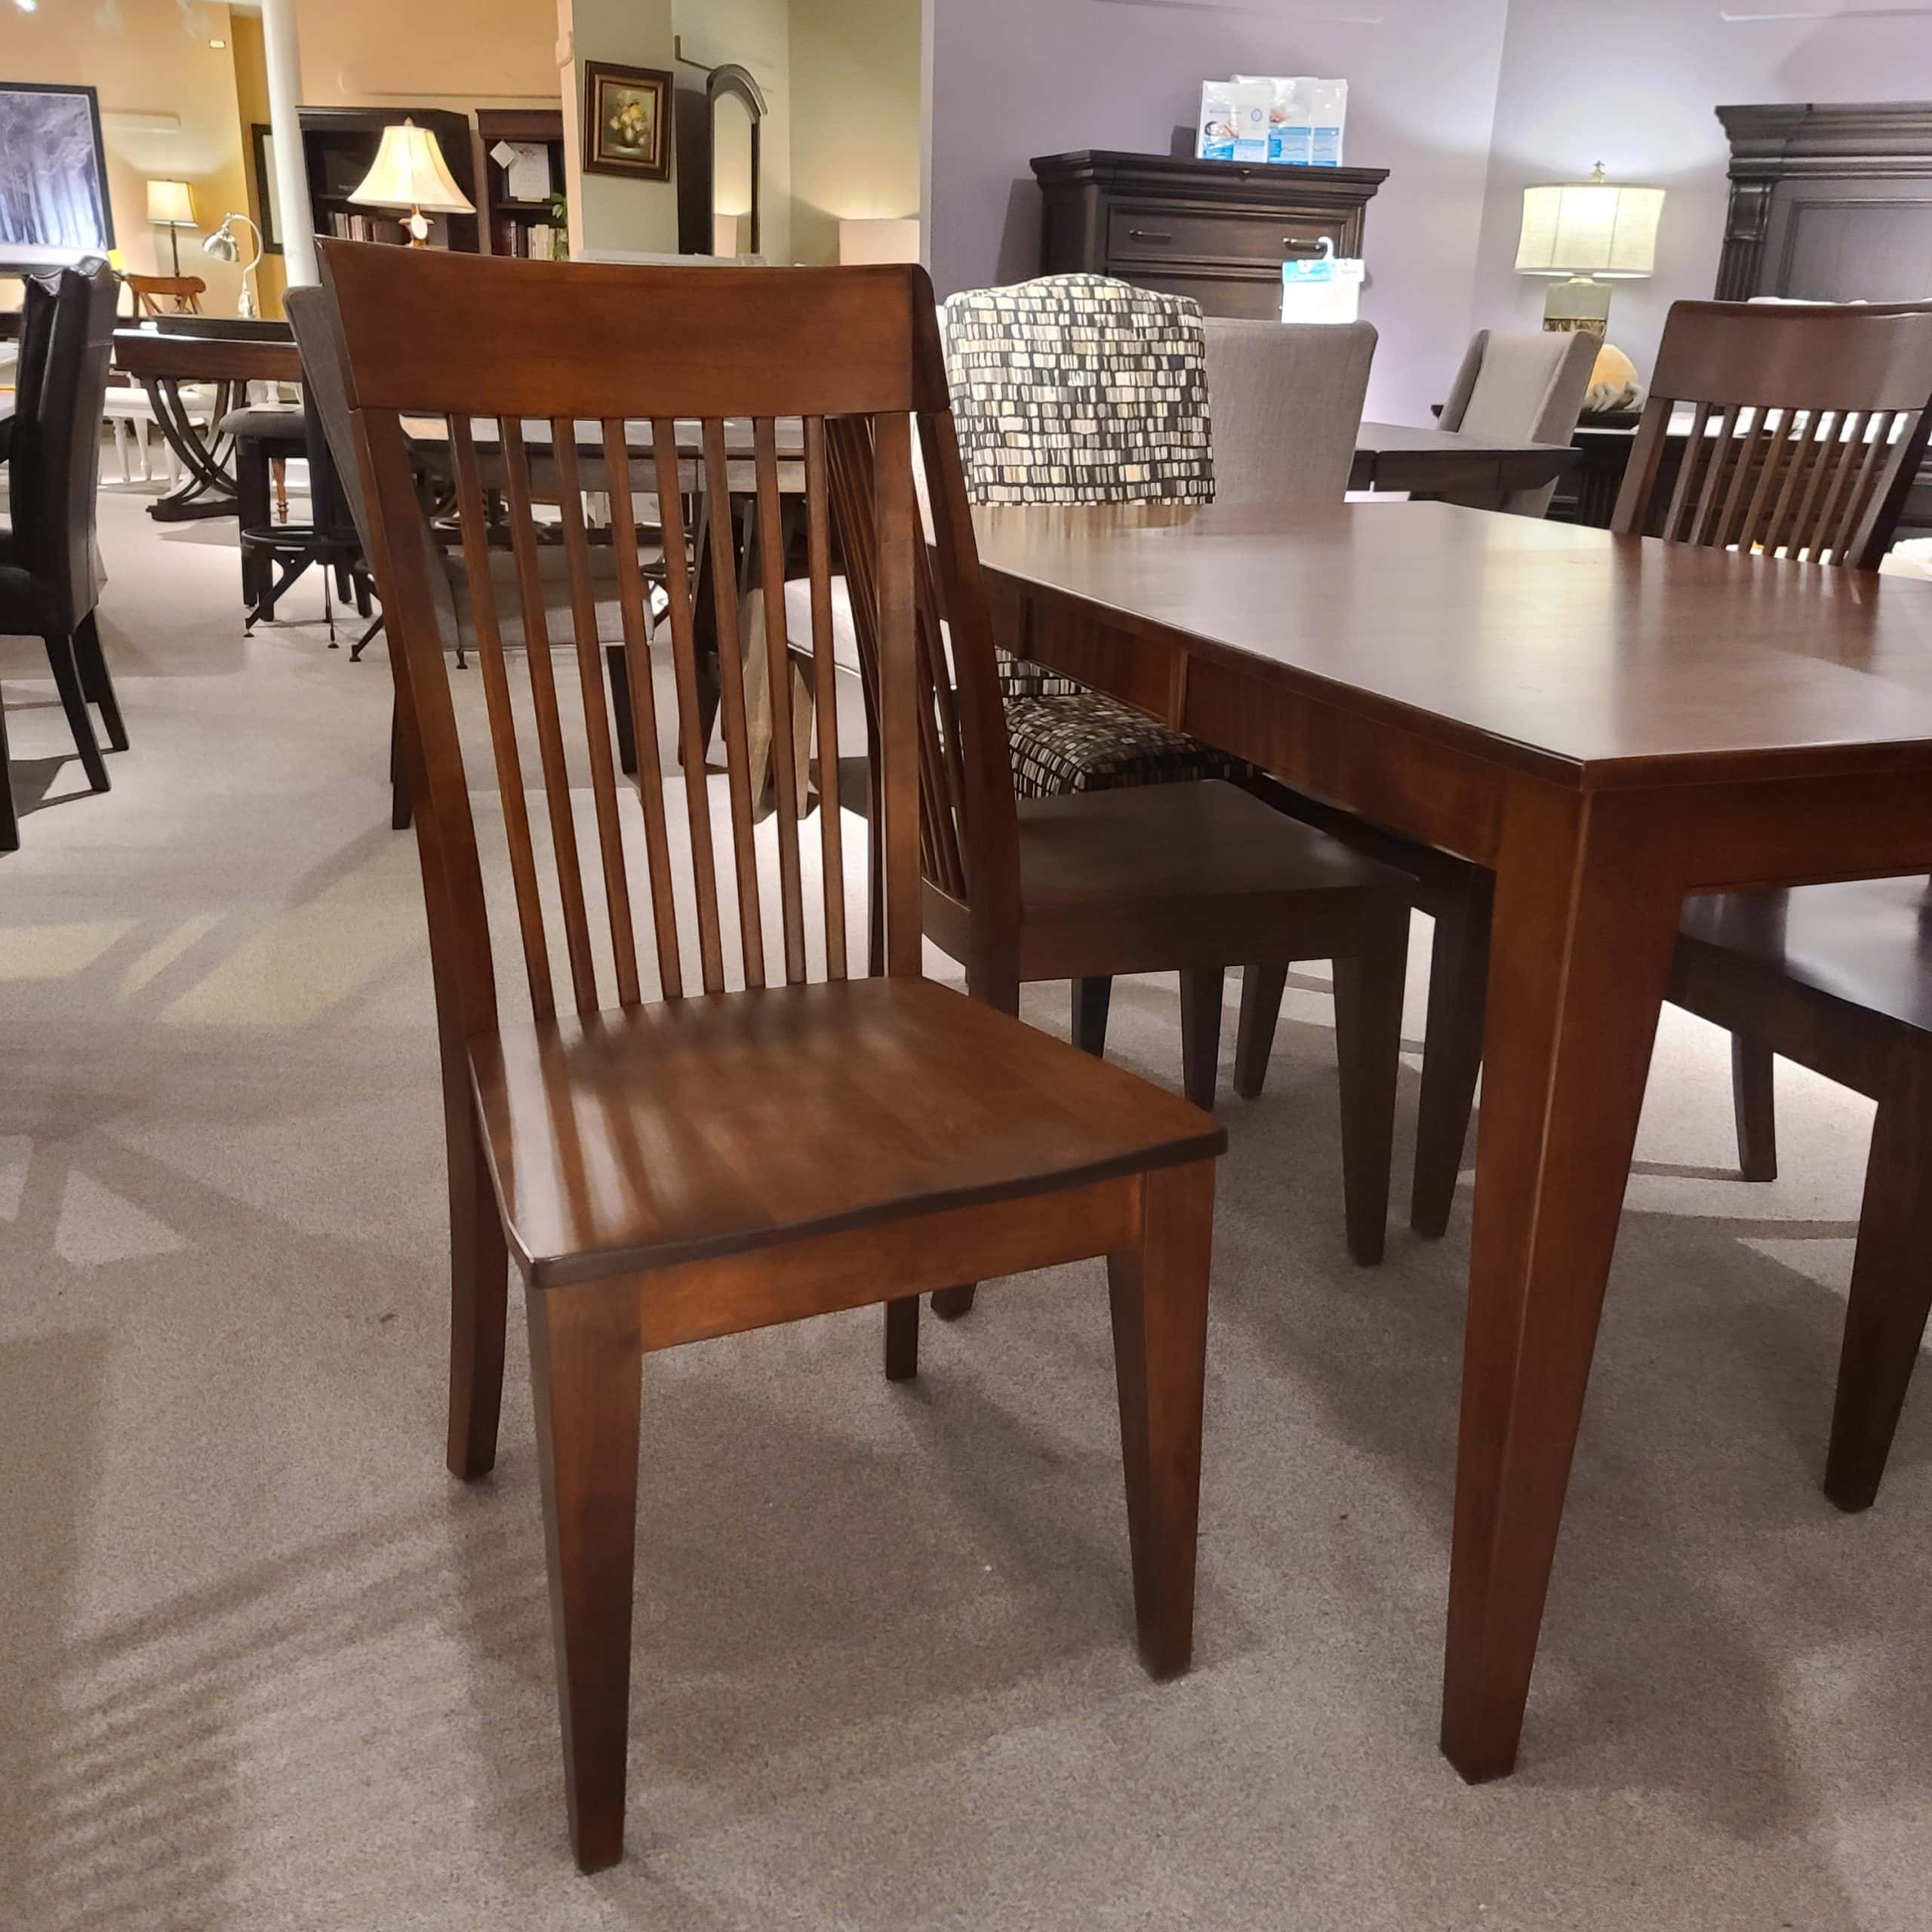 5-Piece Gourmet Solid Wood Dining Set